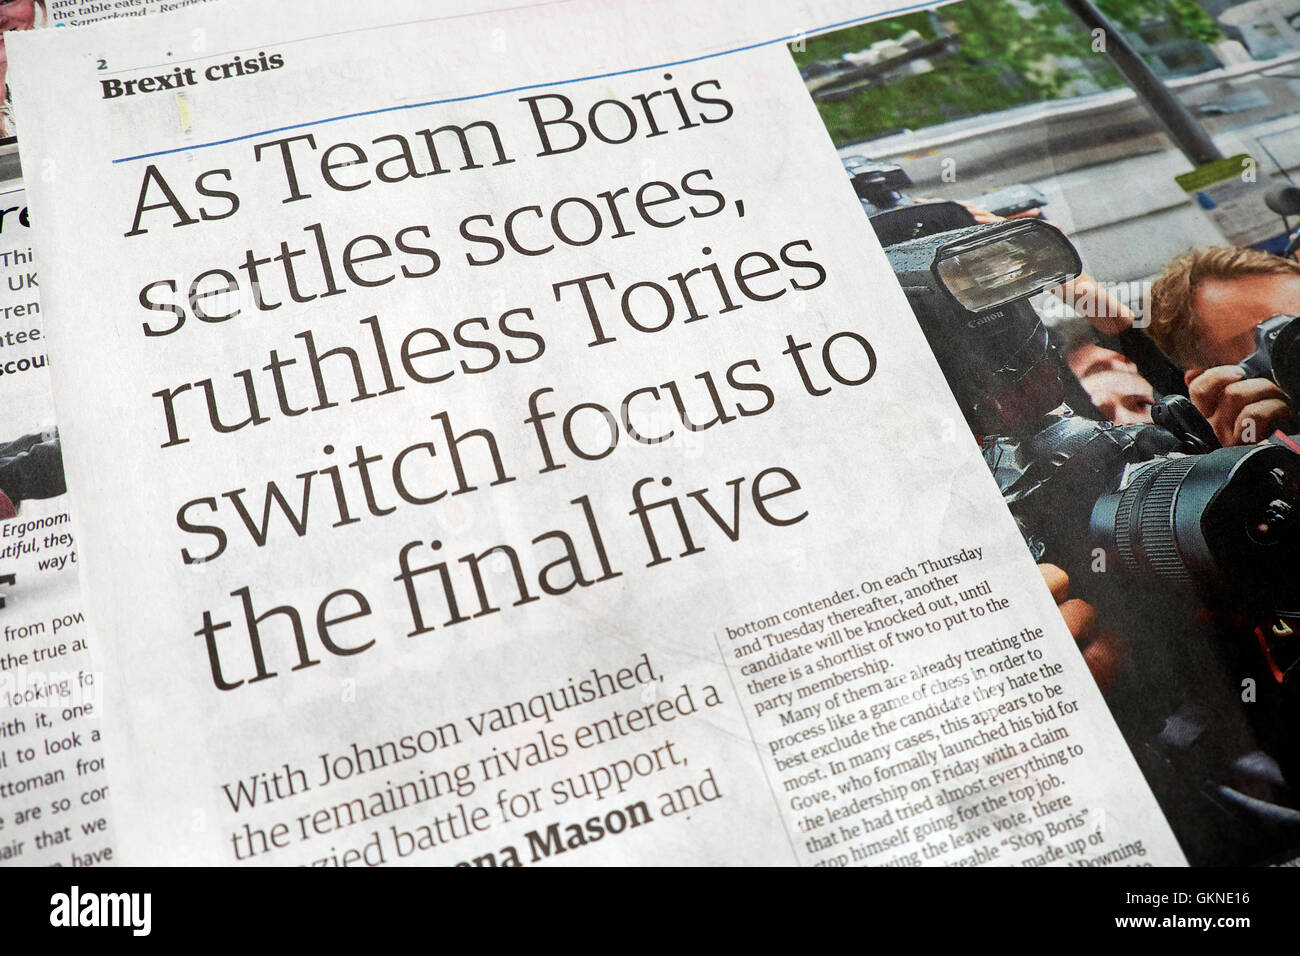 Brexit newspaper article  'As Team Boris settles scores, ruthless Tories switch to the final five'  in the Tory leadership race 2016 London UK Stock Photo